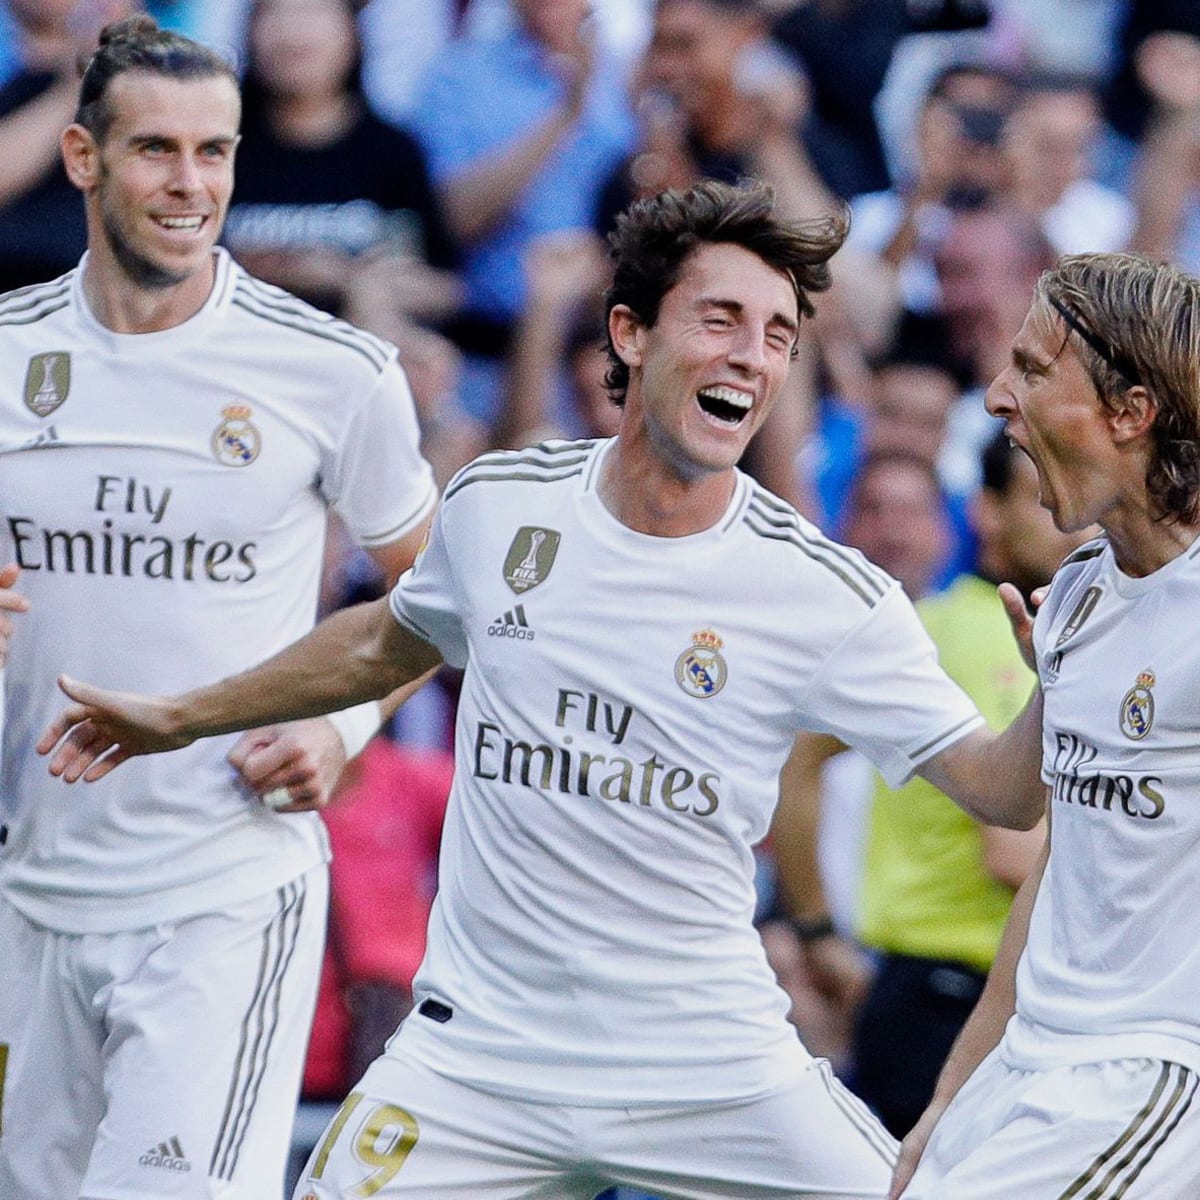 Mallorca vs Real Madrid live stream Watch online, TV channel, time